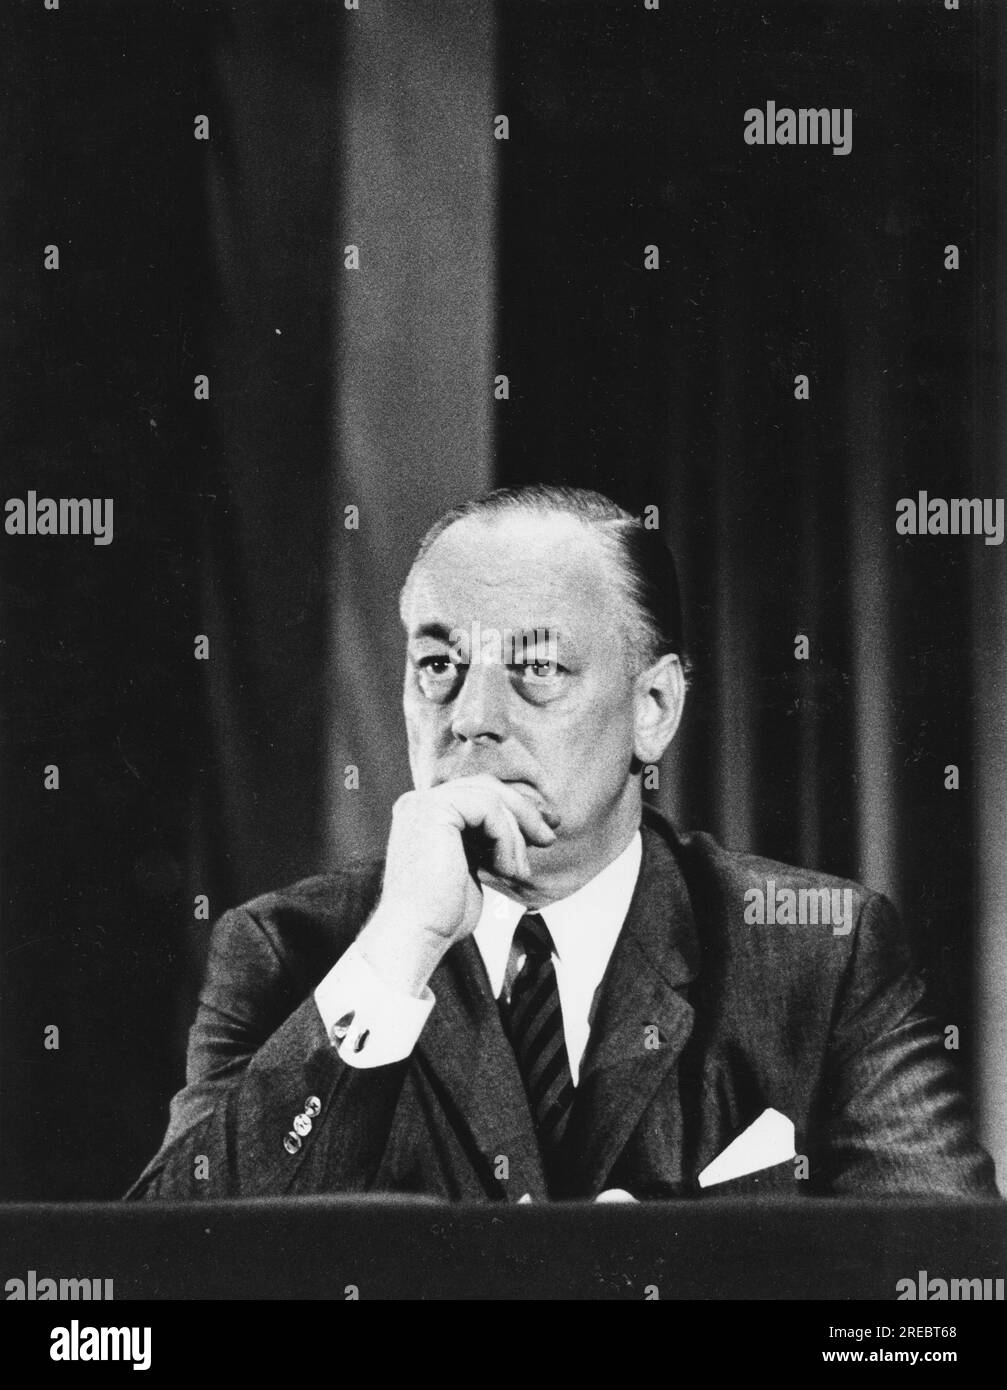 Thadden, Adolf von, 7.7.1921 -, German politician (National-Democratic Party of Germany), party rally, ADDITIONAL-RIGHTS-CLEARANCE-INFO-NOT-AVAILABLE Stock Photo